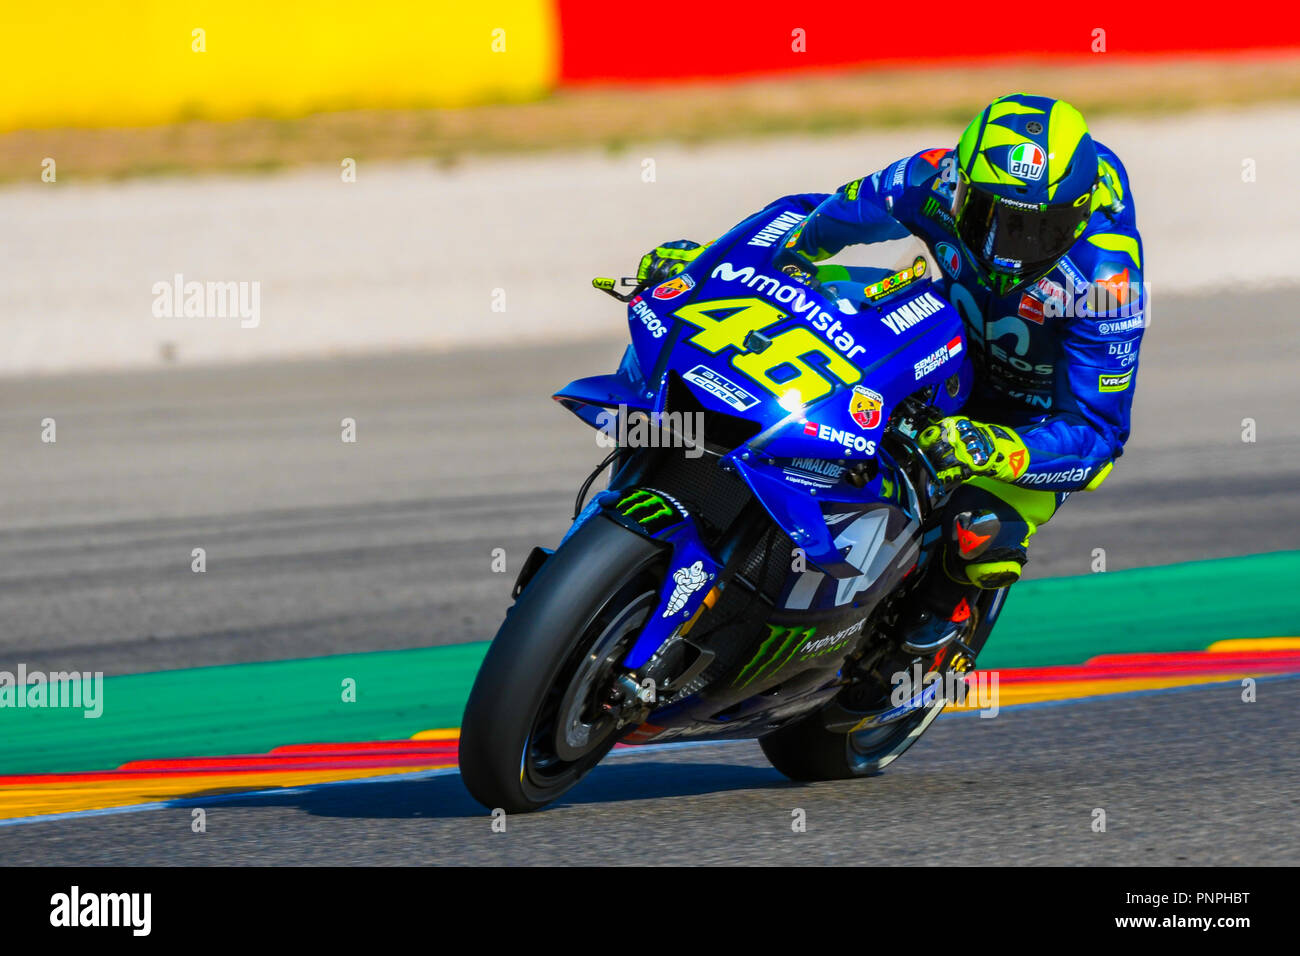 VALENTINO ROSSI (46) of Italy and Movistar Yamaha Moto GP during the MOTO  GP Free Practice